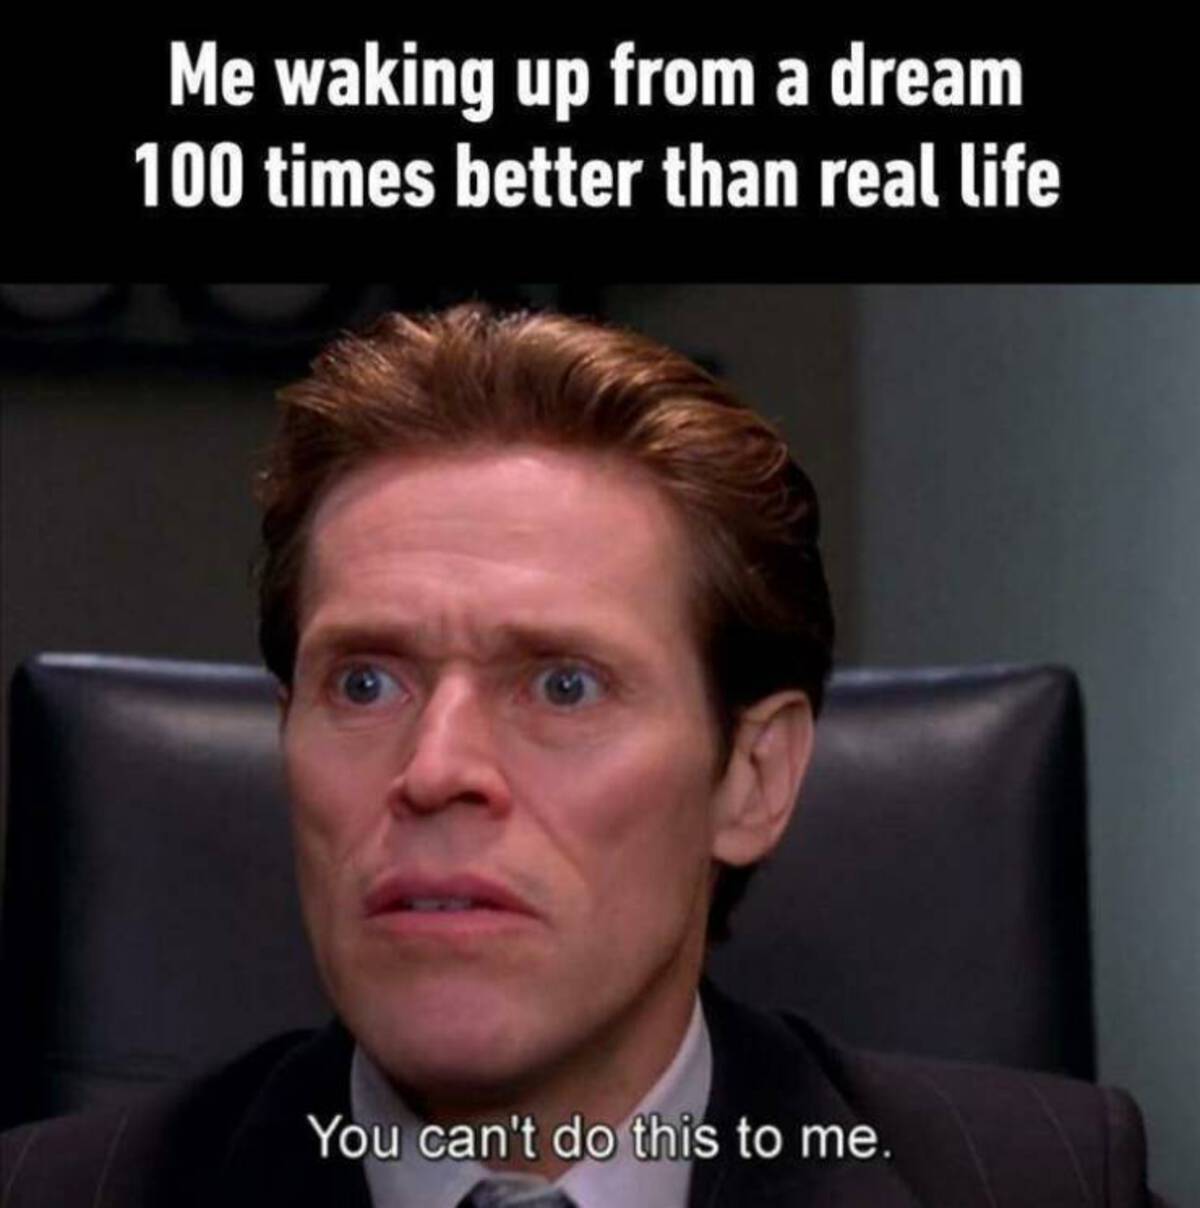 person - Me waking up from a dream 100 times better than real life You can't do this to me.